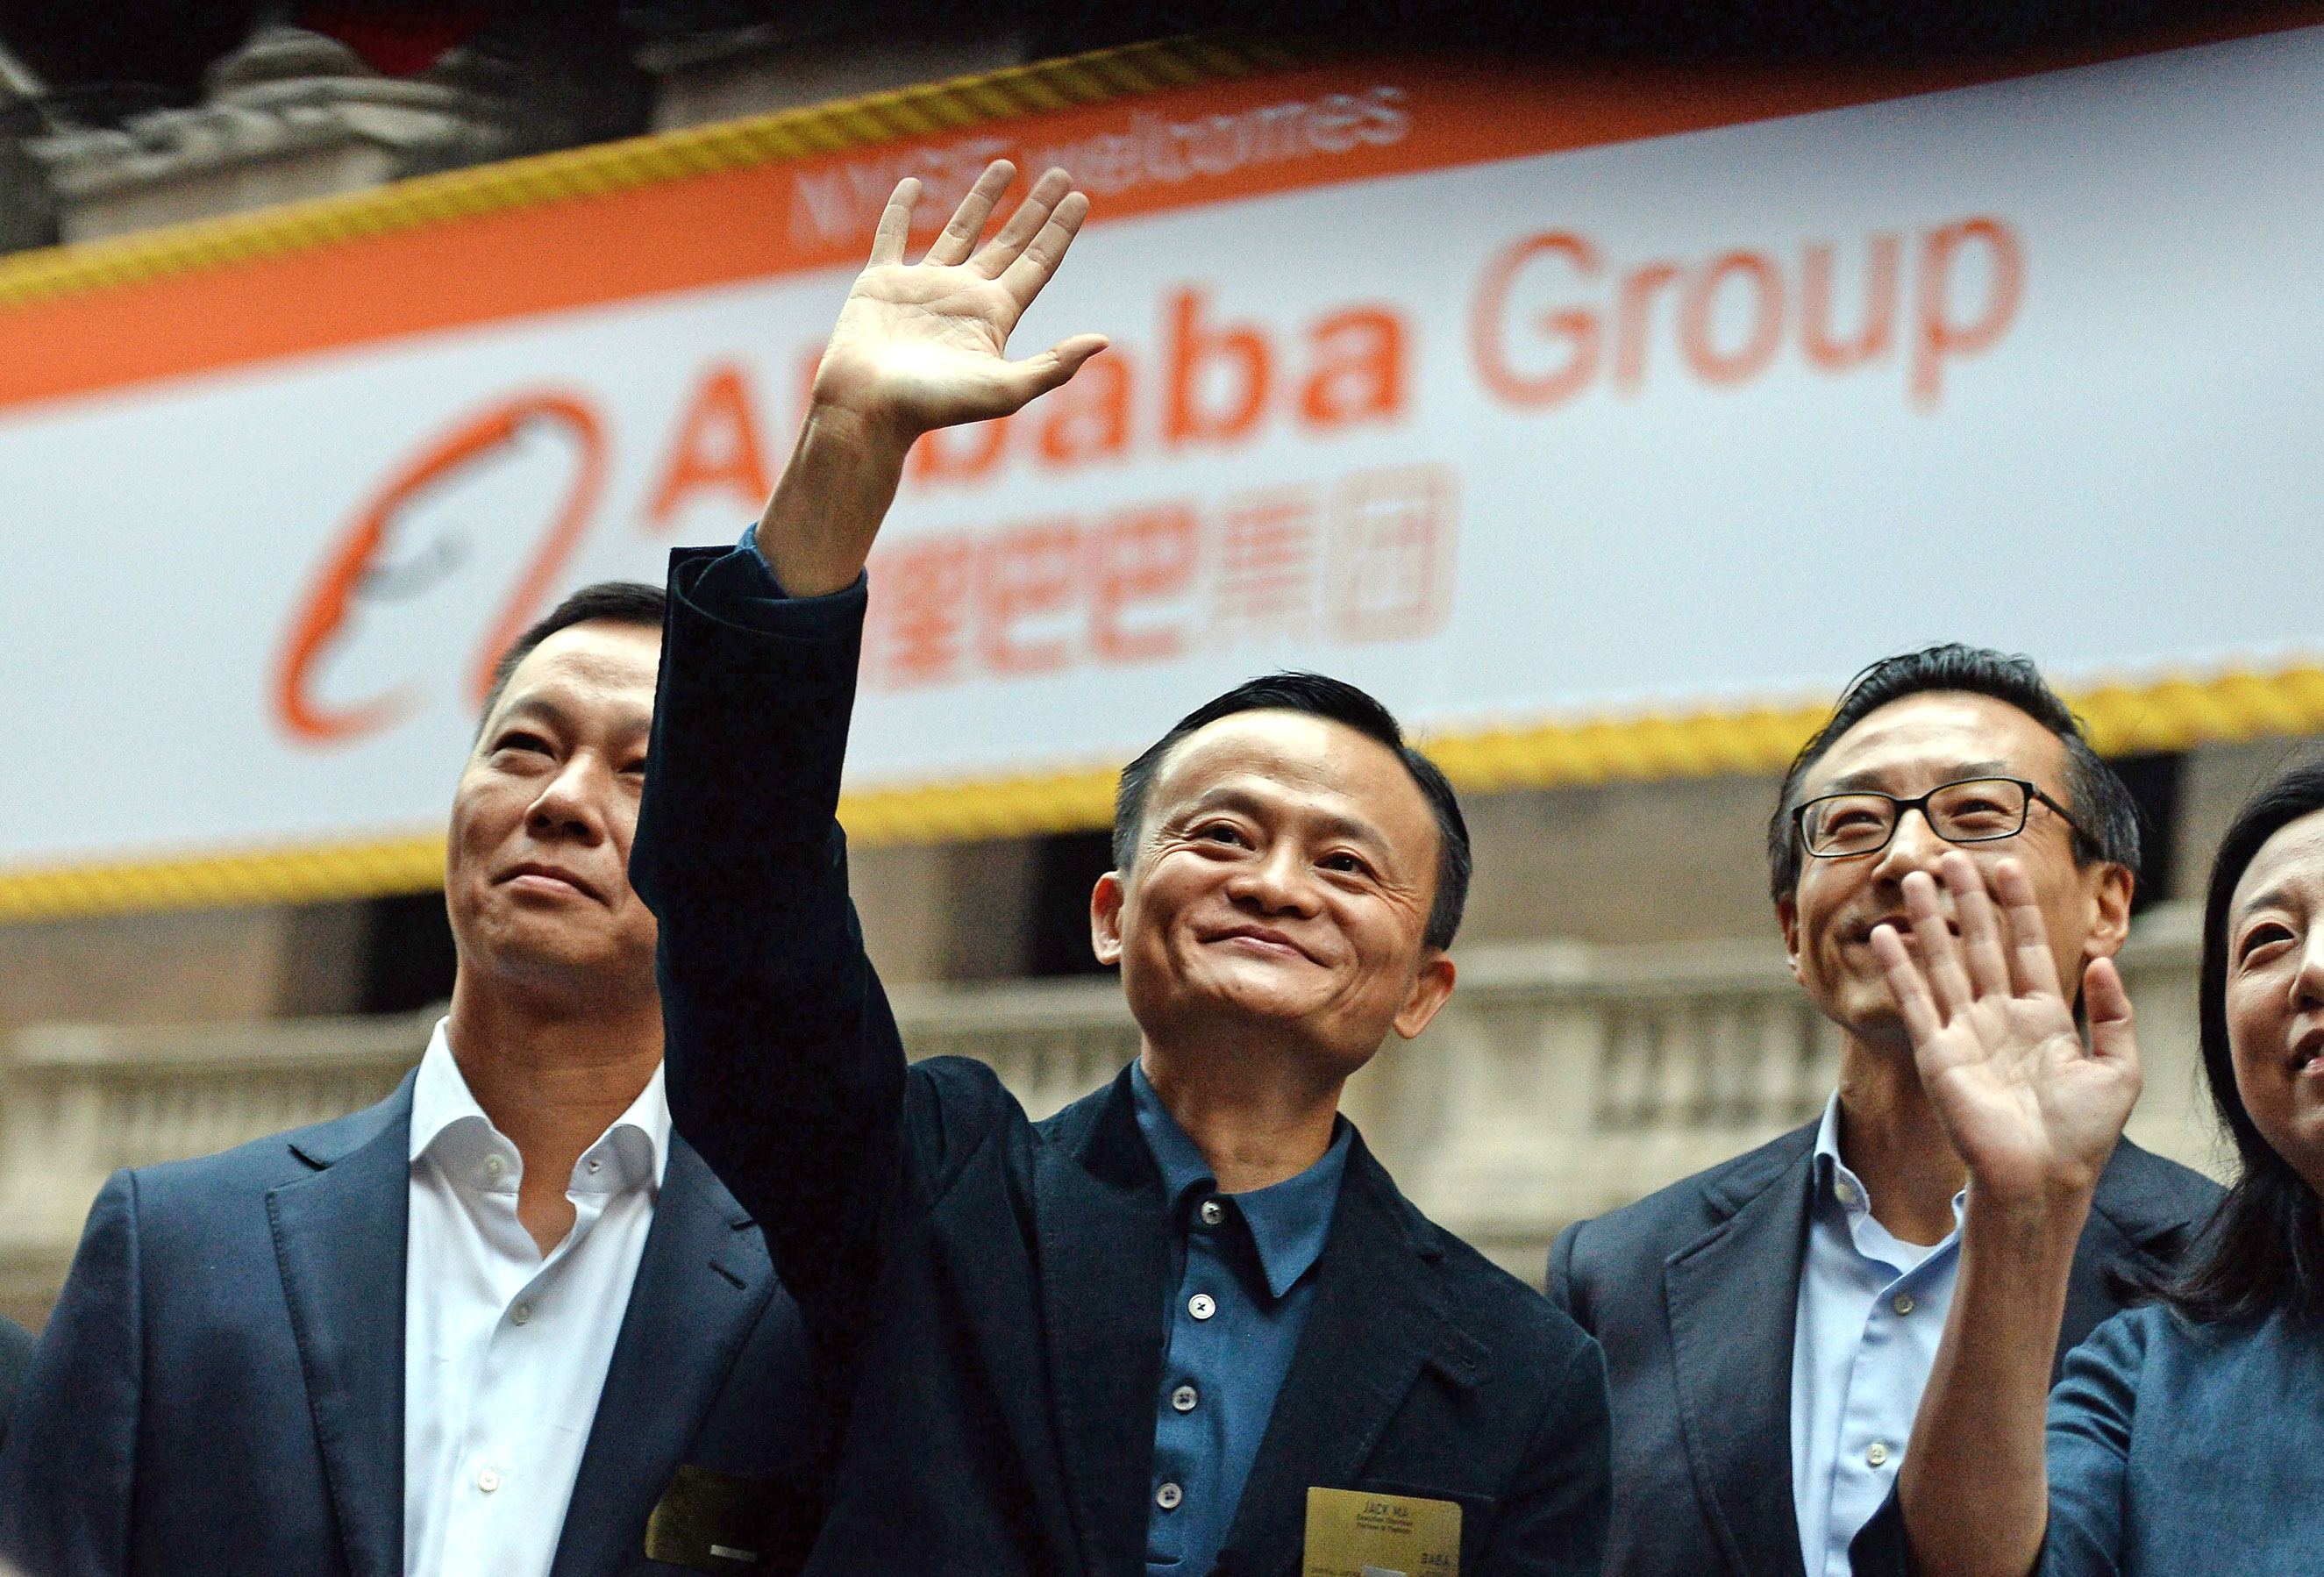 Chinese online retail giant Alibaba CEO Jack Ma (center) waves as he arrives at the New York Stock Exchange in New York City on Sept. 19, 2014.